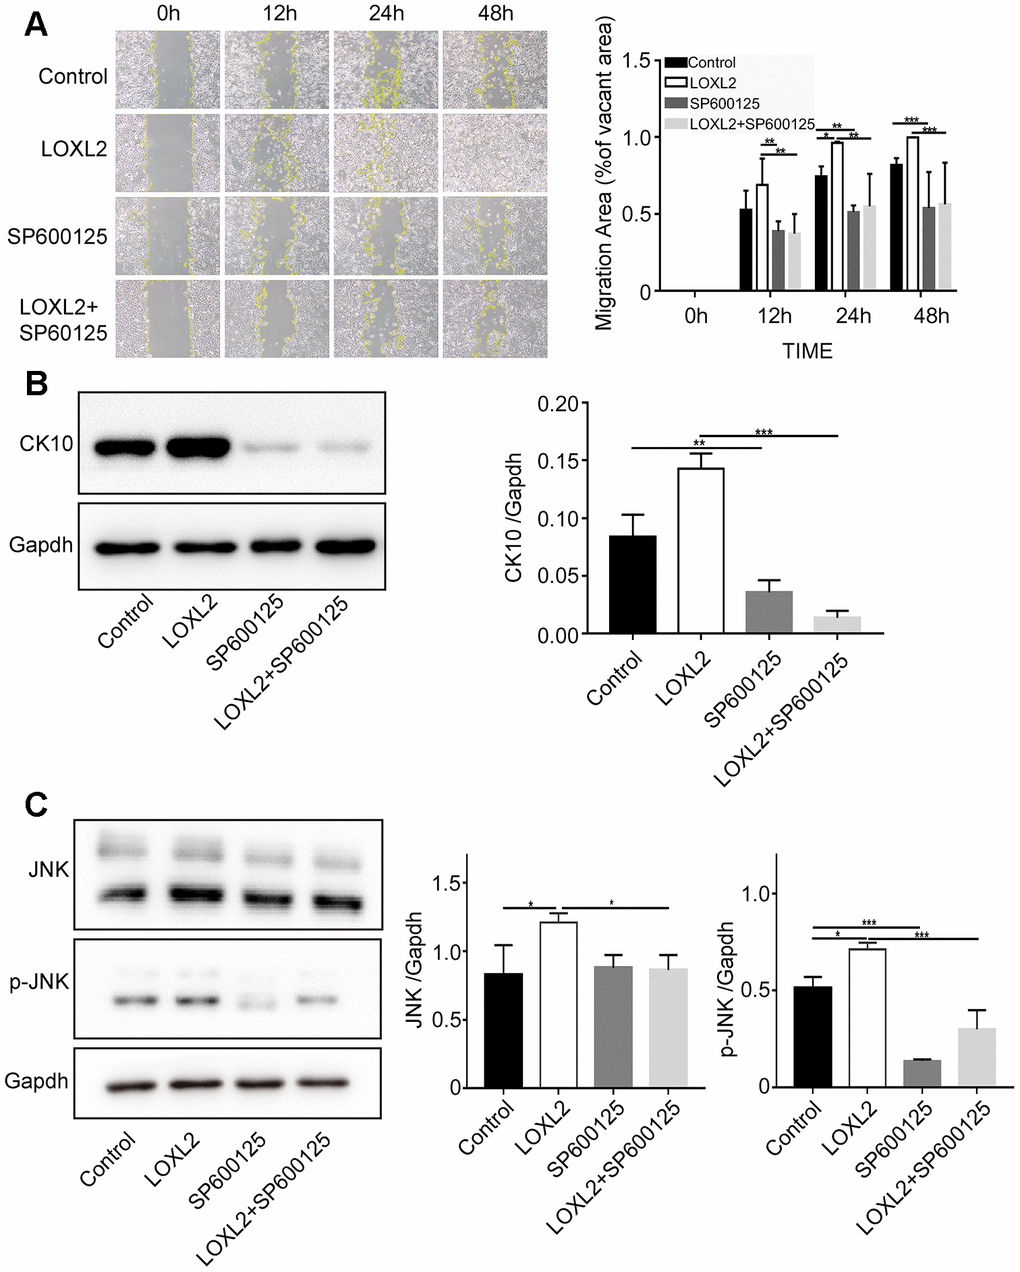 LOXL2 (Lysyl oxidase-like 2) promotes keratinocyte migration and differentiation via JNK (c-Jun N-terminal kinase) signaling pathway. (A) Representative images show the migration of keratinocytes based on the scratch wound assay in the control medium, LOXL2, SP600125 (JNK inhibitor), and SP600125 plus LOXL2 groups at various time points (0, 12, 24 and 48 h). The histogram plot shows the cell migration area in each group at various time points. (B) Representative image (left) and histogram plot (right) shows the expression of CK10 protein in the keratinocytes belonging to control medium, LOXL2, SP600125 and SP600125 plus LOXL2 groups. GAPDH was used as loading control. The values are expressed as means ±SEM. (C) Representative image (left) and histogram plot (right) shows the levels of JNK and phospho-JNK in the keratinocytes from control medium, LOXL2, SP600125 and SP600125 plus LOXL2 groups. The values are expressed as means ±SEM. ***p 